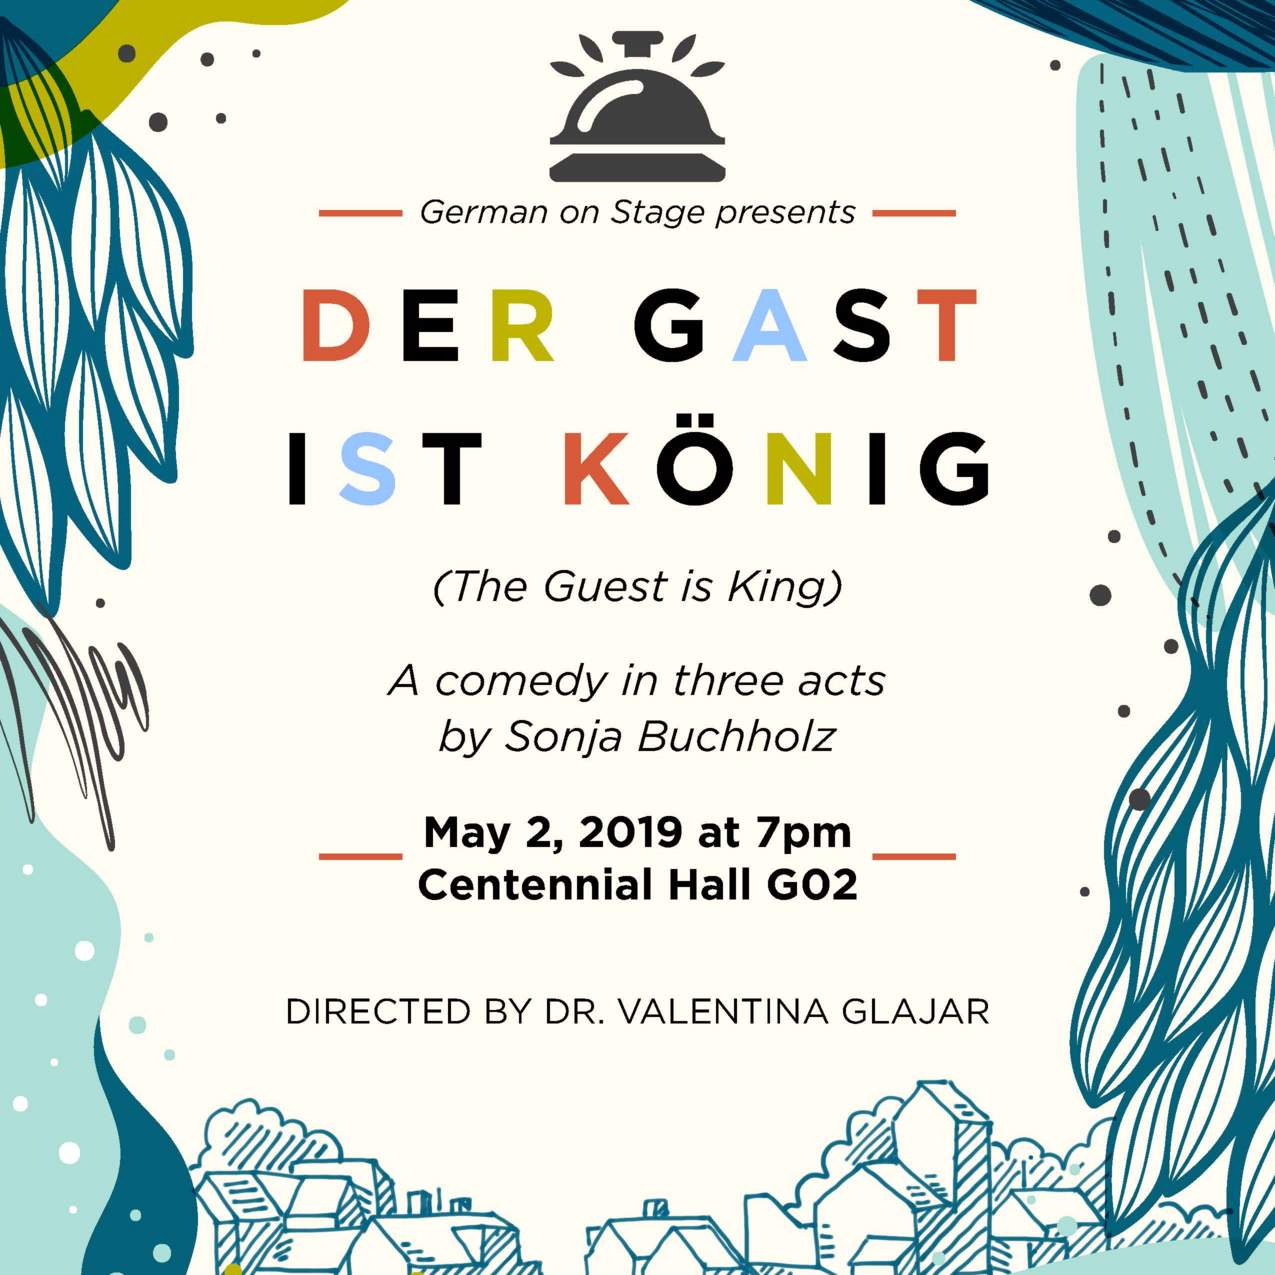 Playbill for Der Gast ist König, a comedy in three acts by Sonja Buchholz, performed May 2, 2019, 7pm, Centennial Hall G02, Directed by Dr. Valentina Glajar